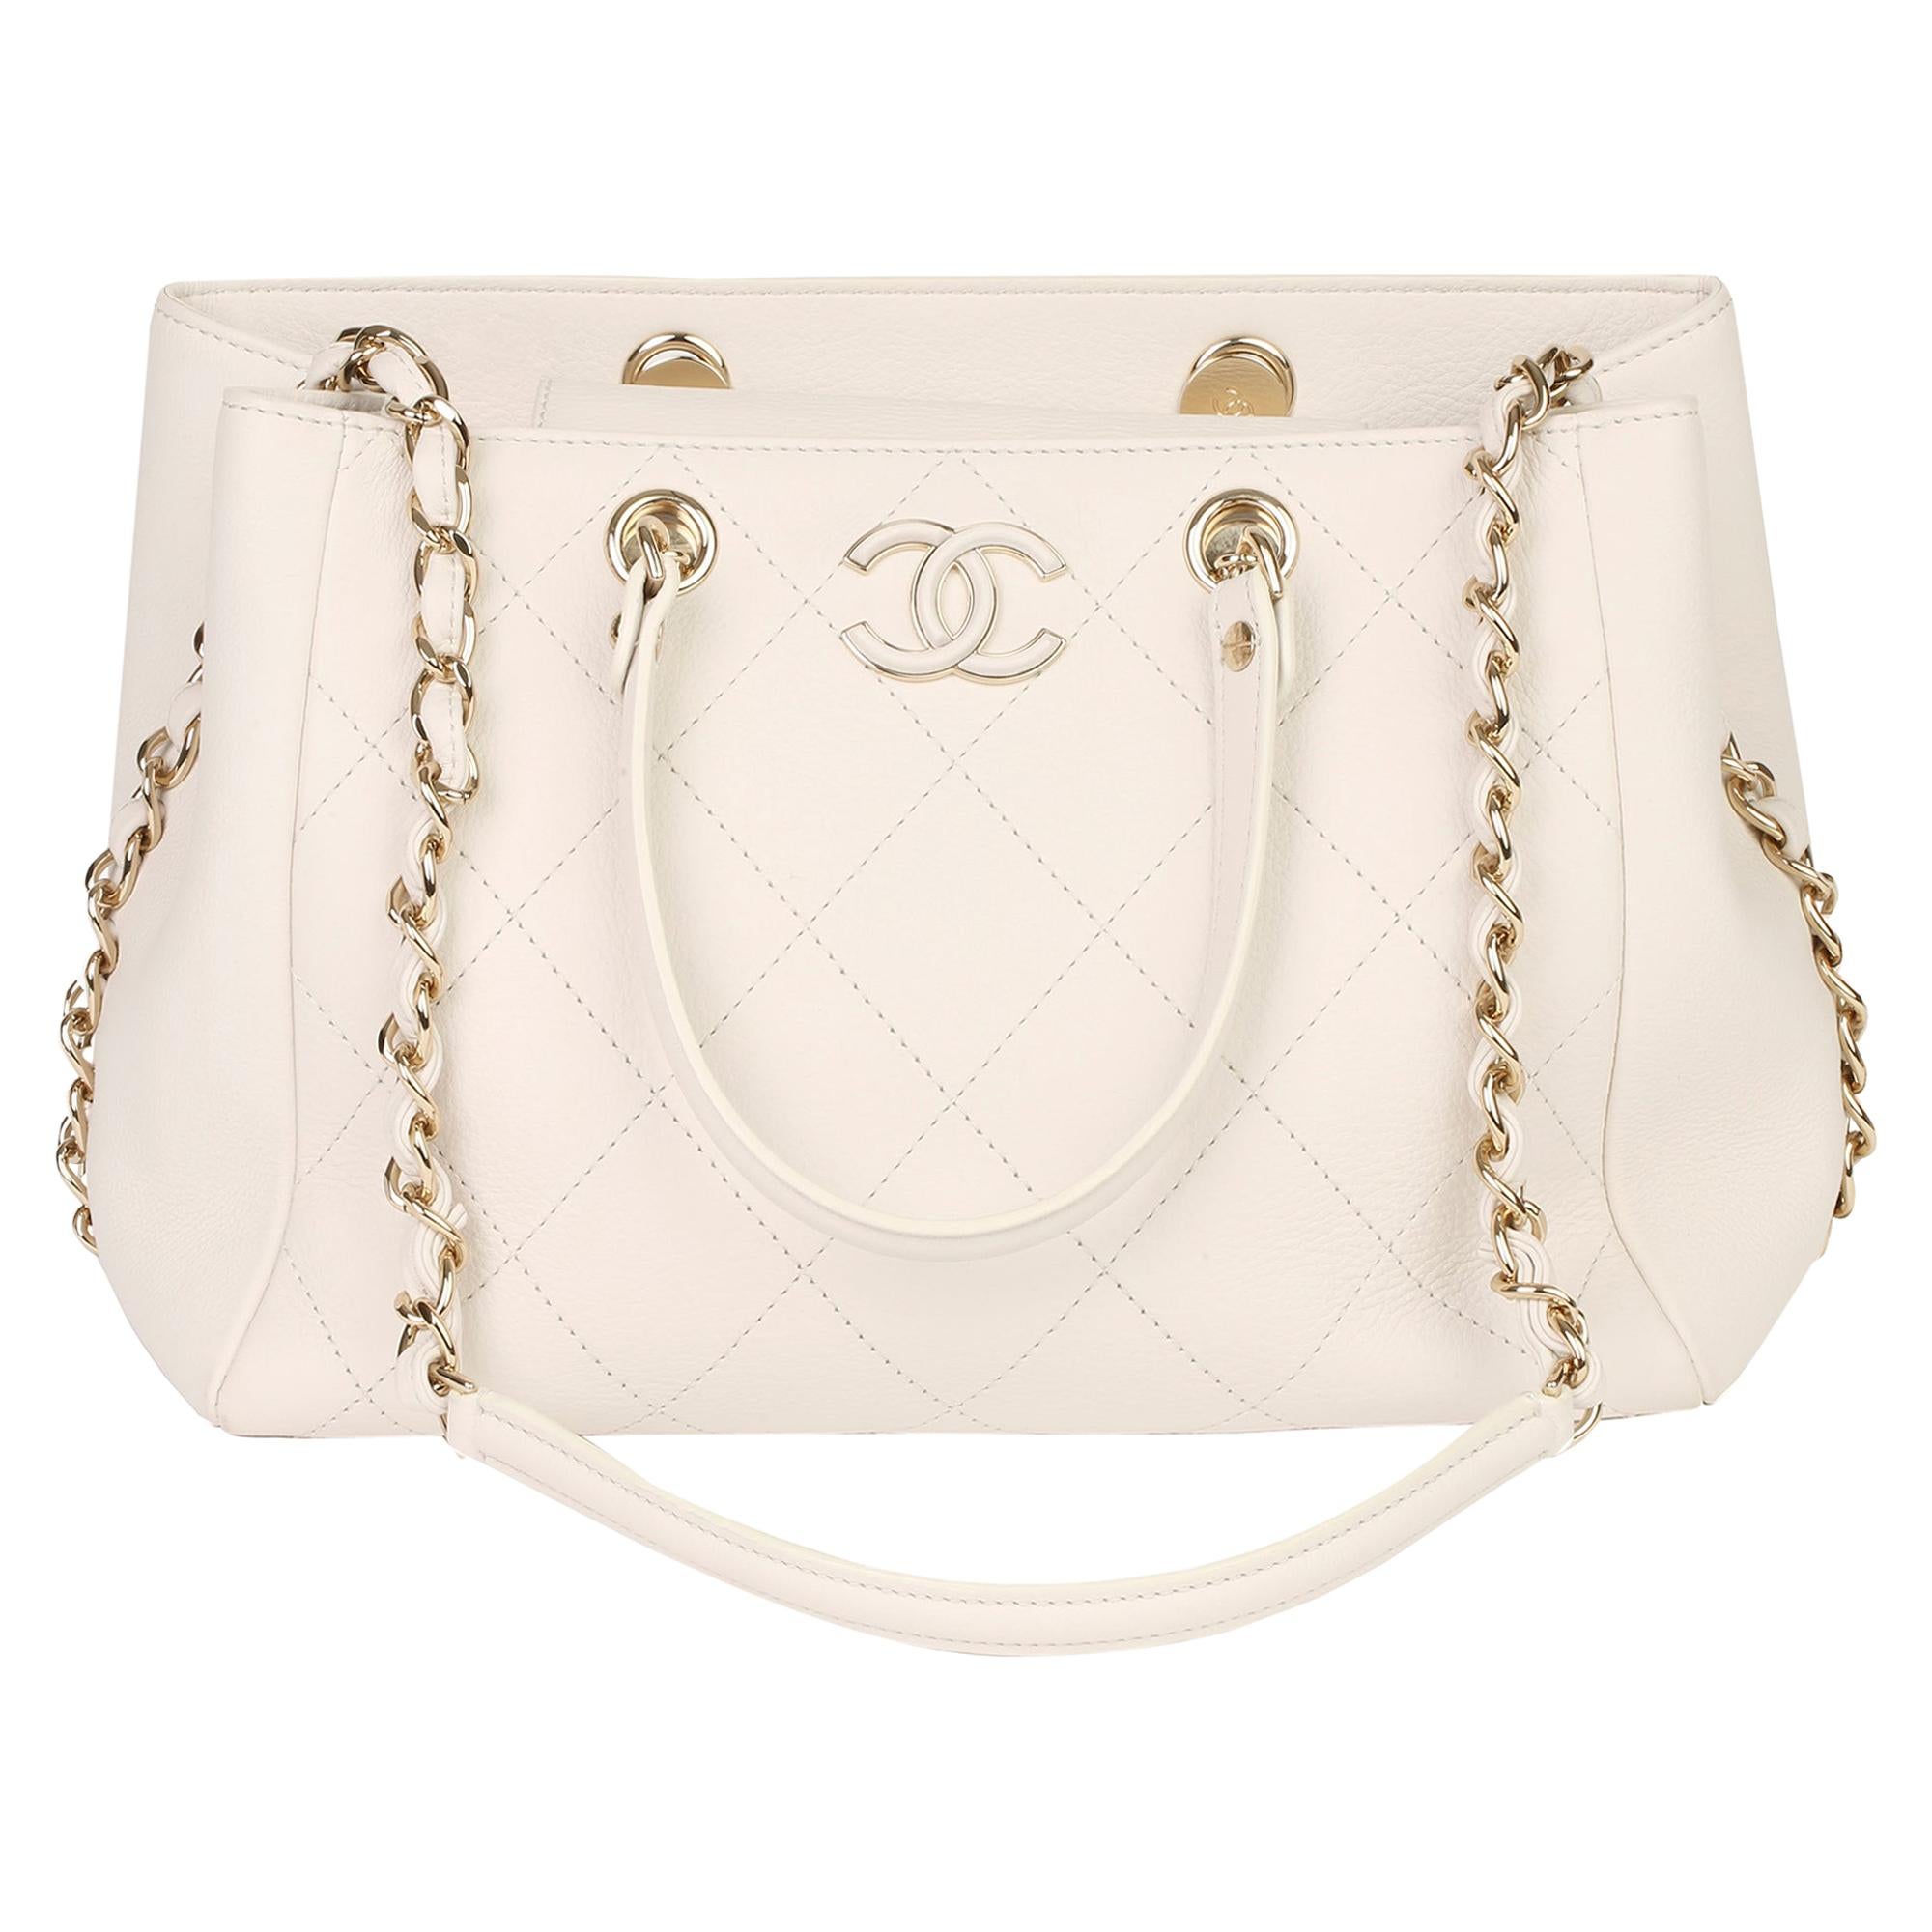 Chanel Ivory Quilted Calfskin Leather Timeless Shoulder Tote 